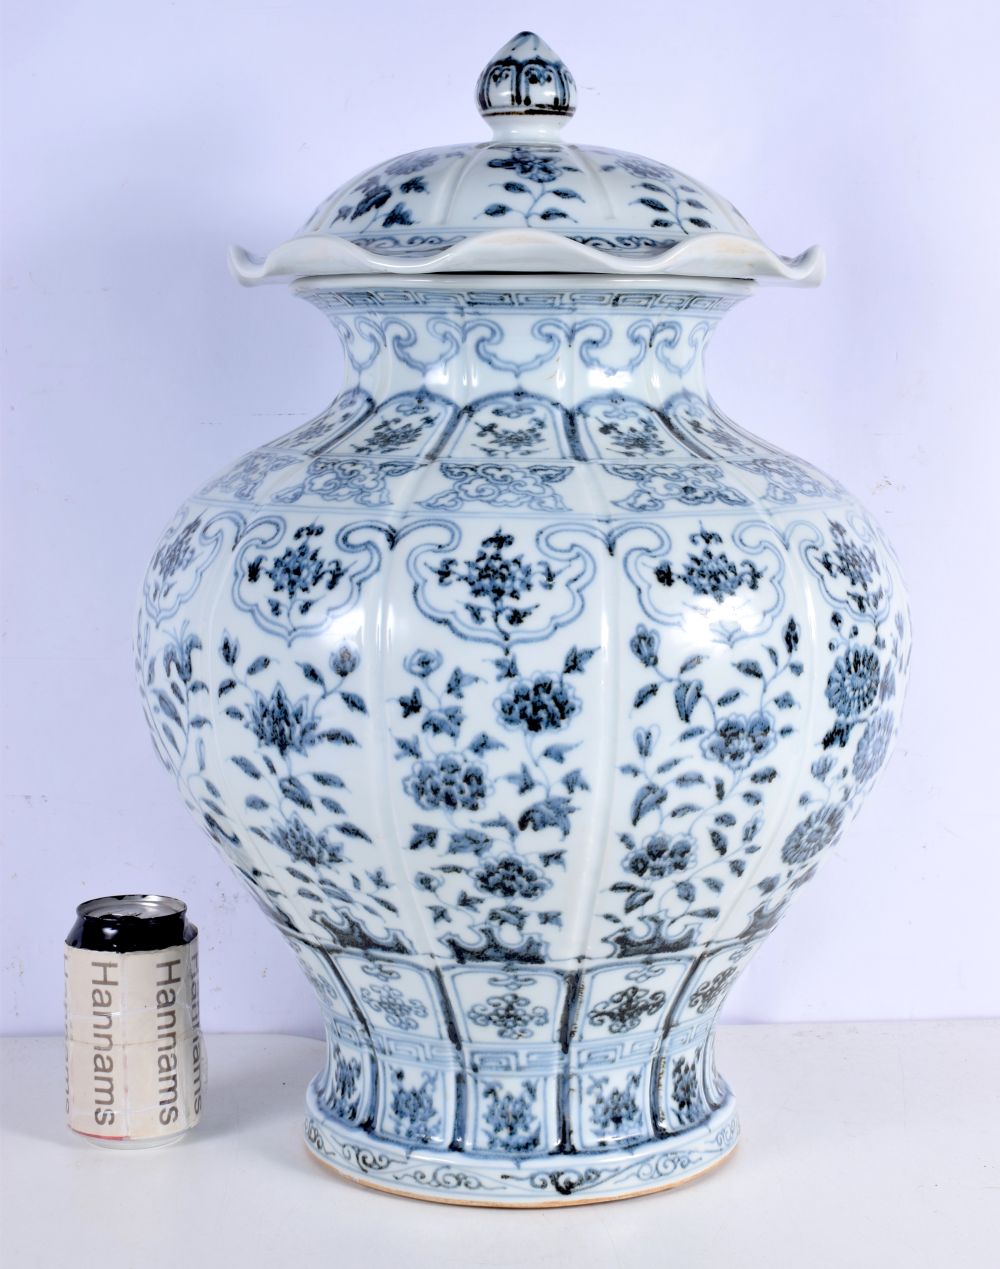 A large Chinese Porcelain blue and white Jar with cover decorative with a floral pattern 55 cm